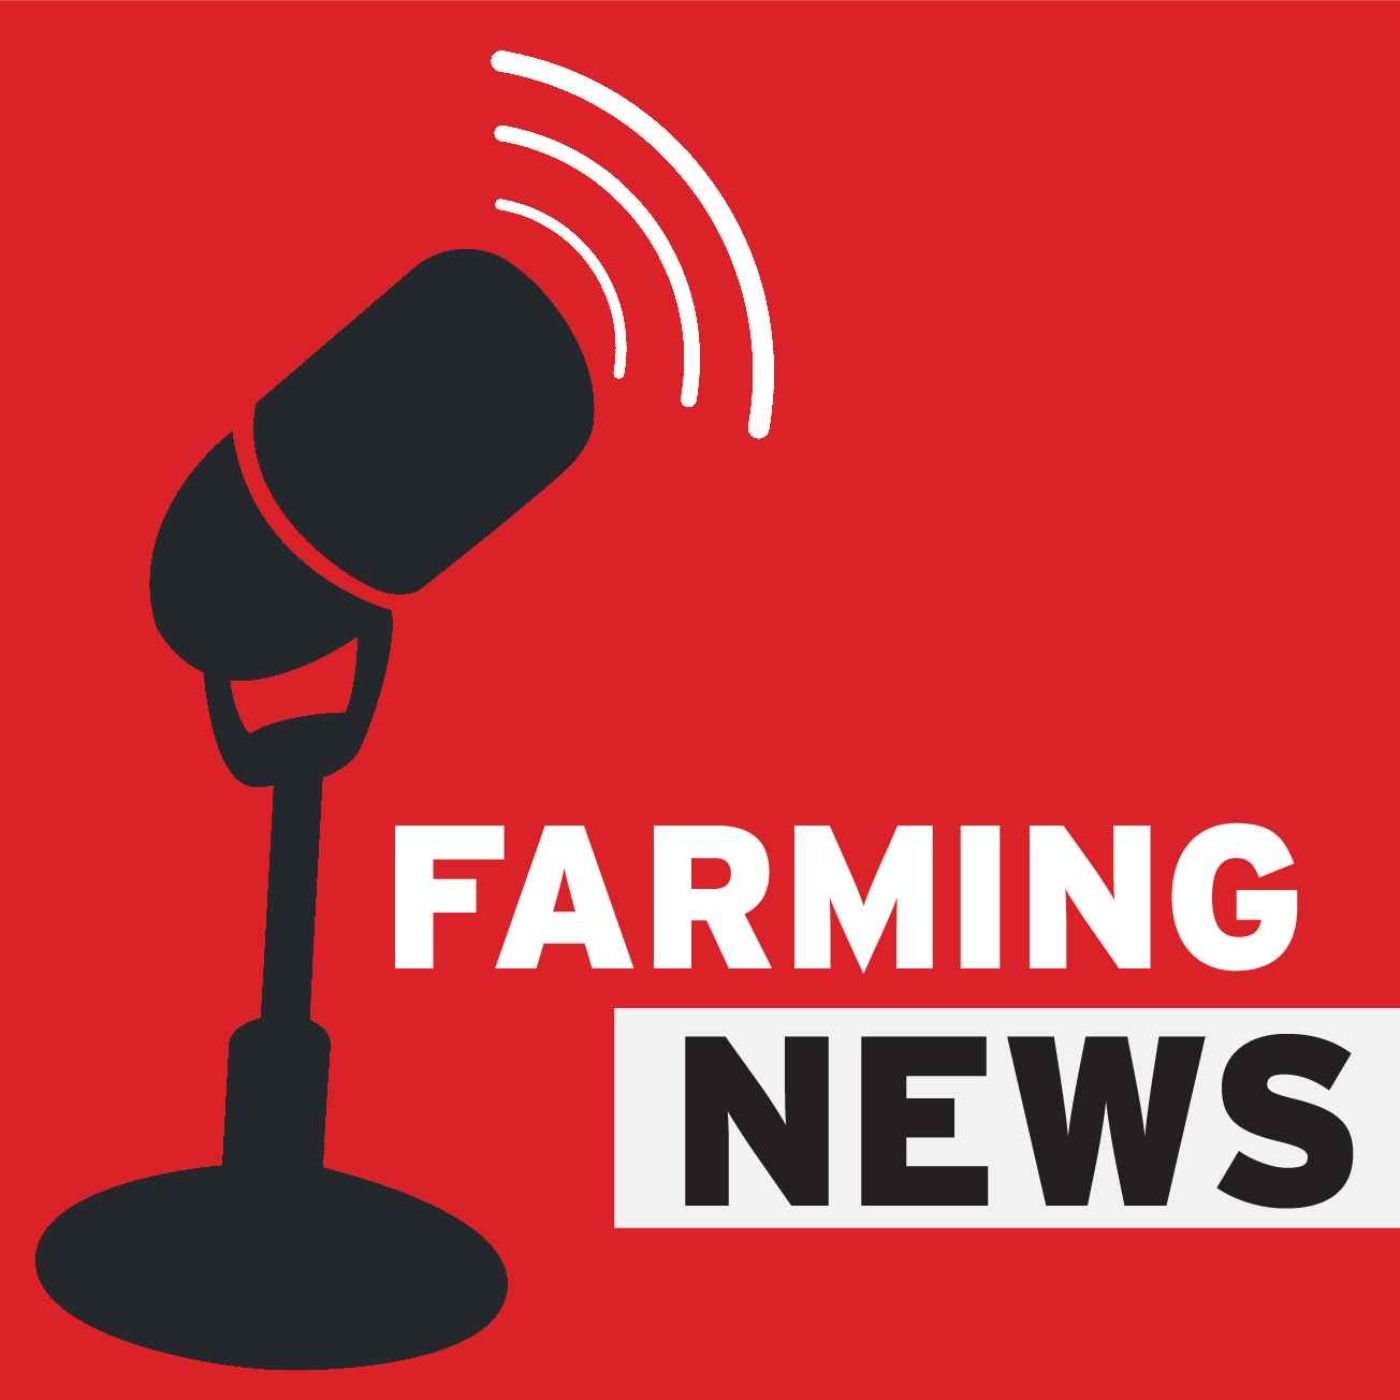 Ep 985: Farming News - challenging weather, Harris on farming and calf exports